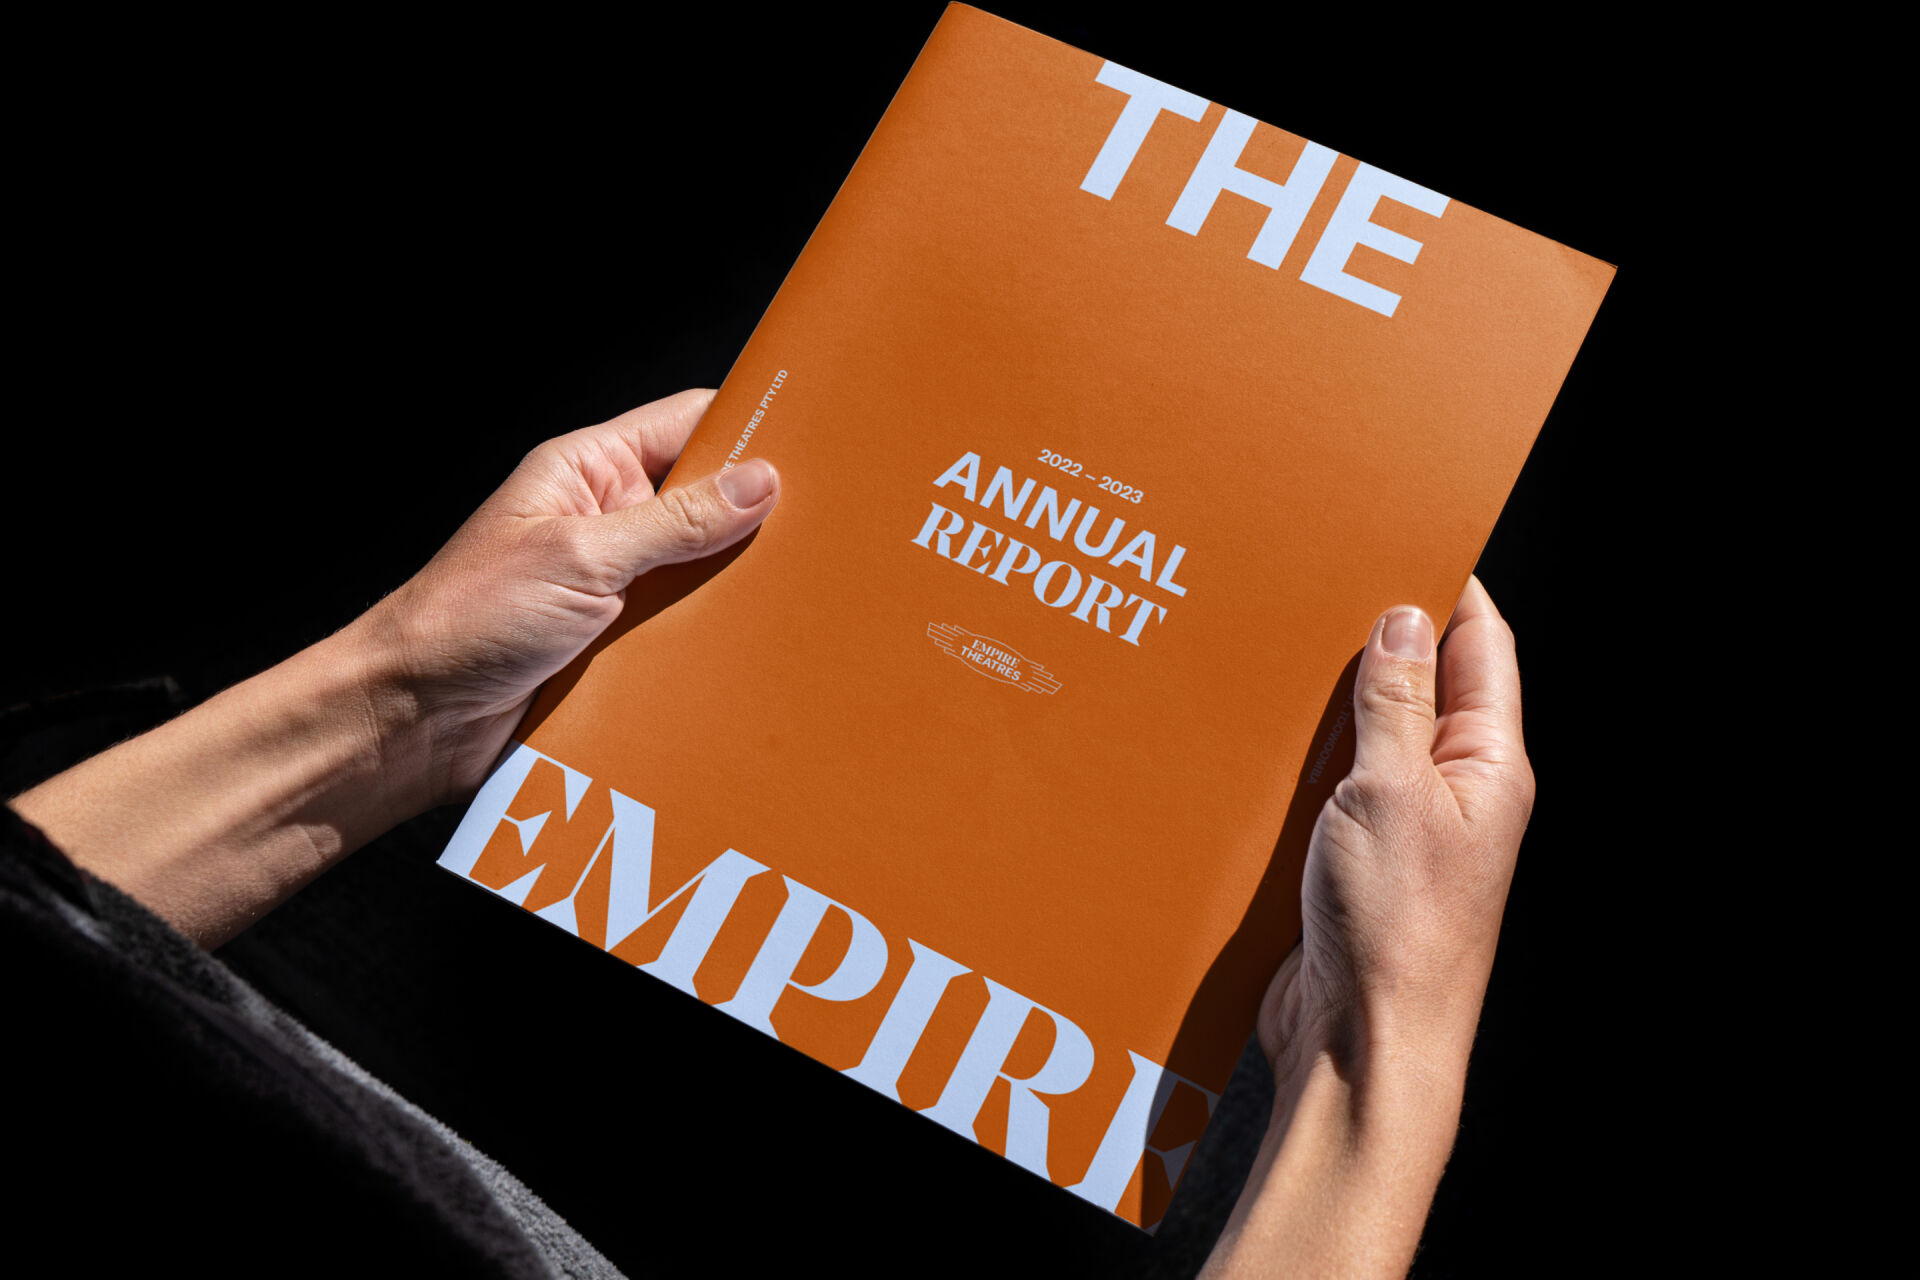 Annual report cover designed for The Empire Theatre brand identity, featuring strong typography.